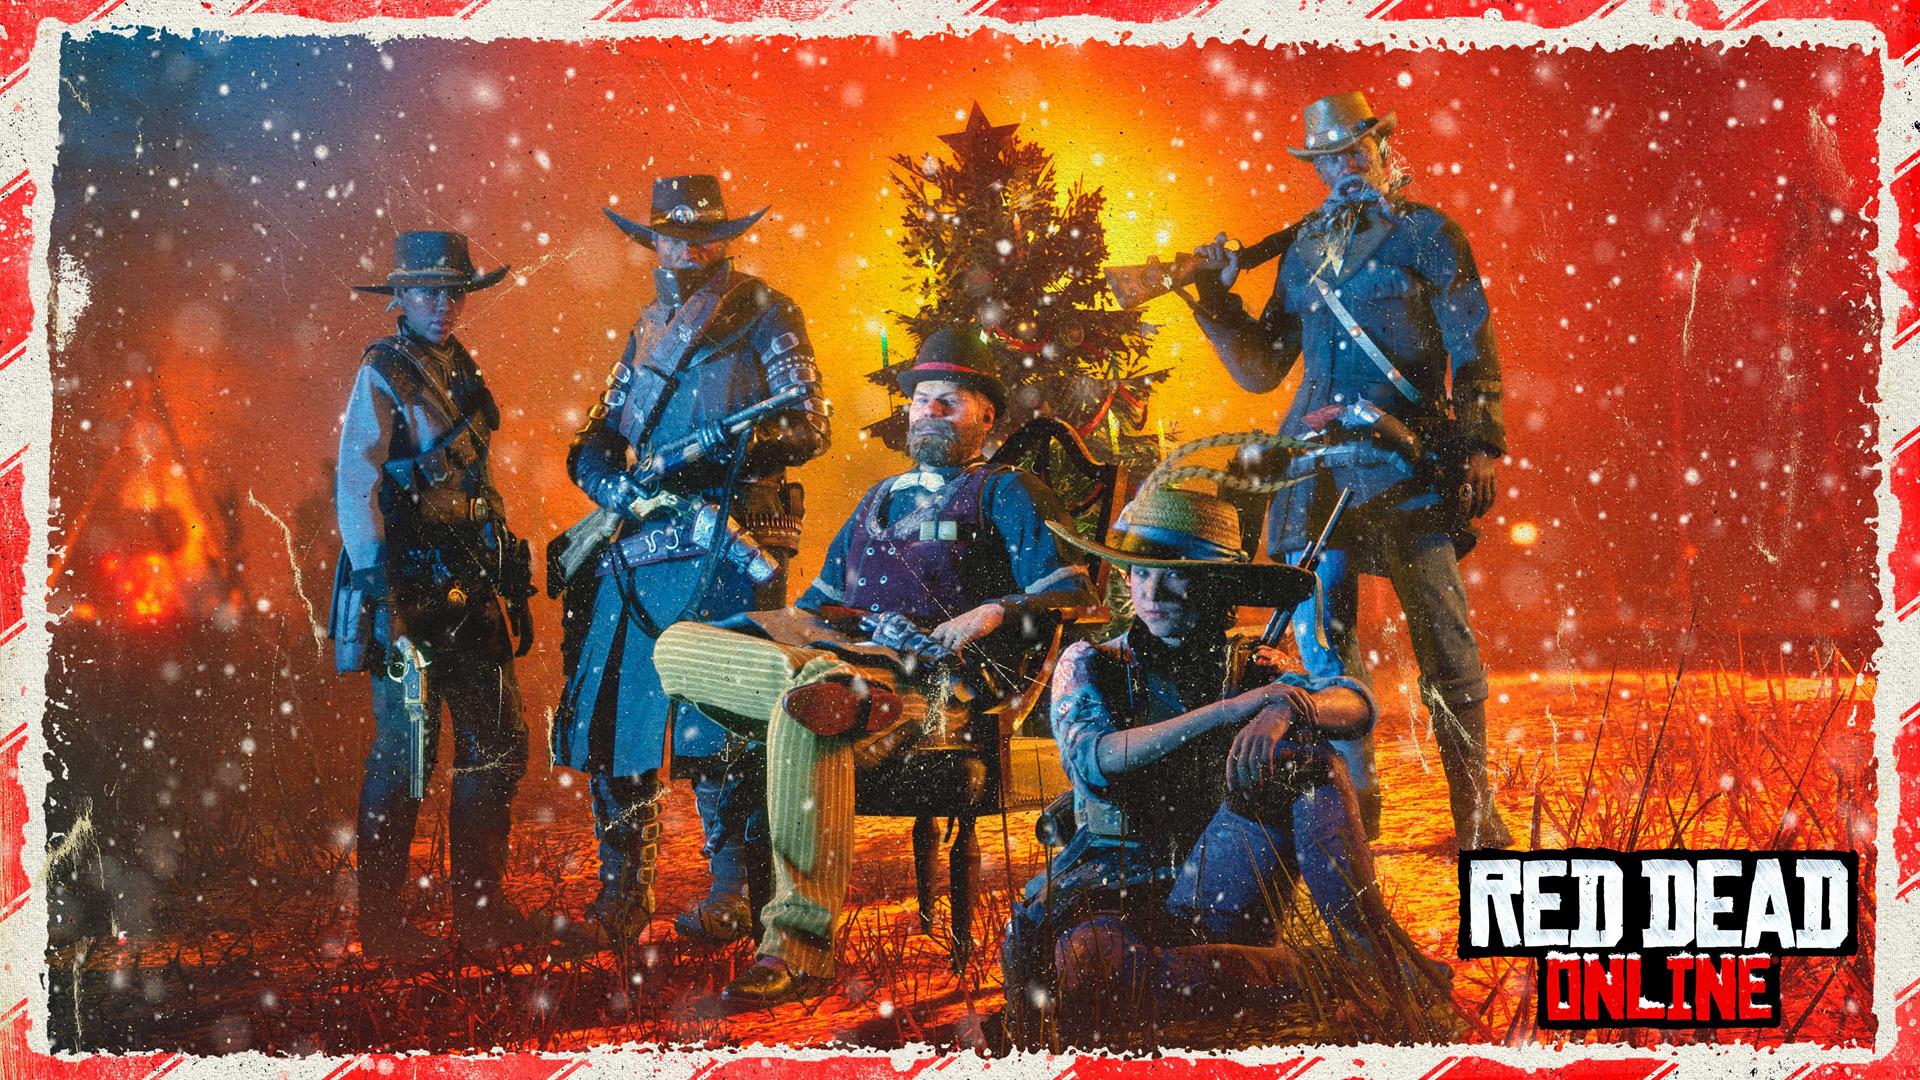 Image for Get free weapons, vehicles and more when you log into GTA Online and Red Dead Online during the holiday